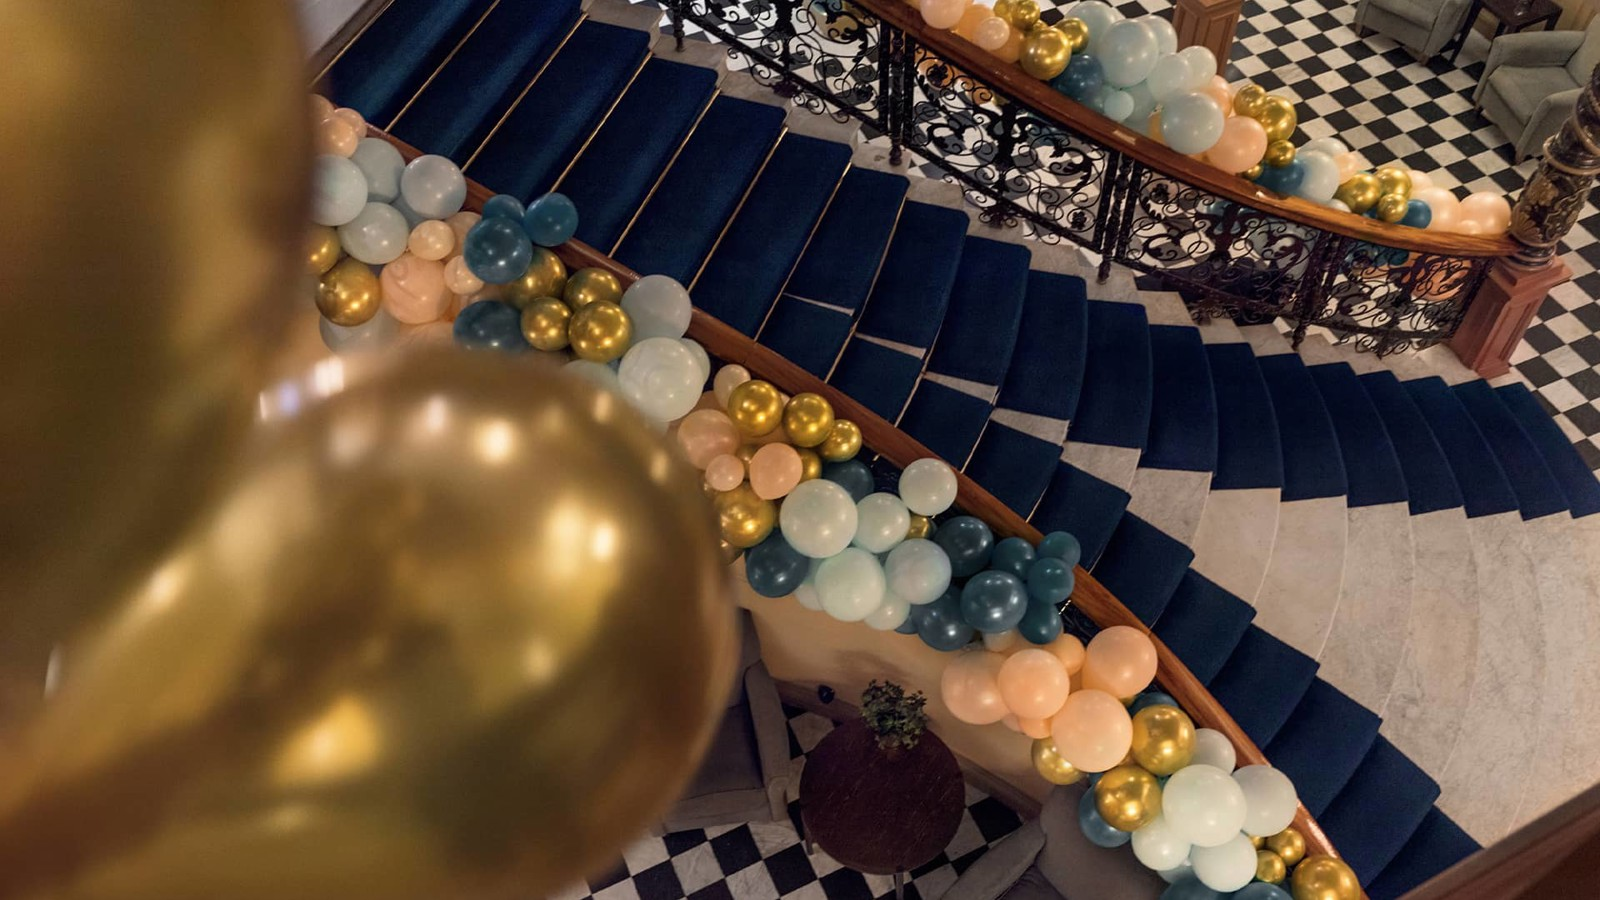 A staircase filled with balloons